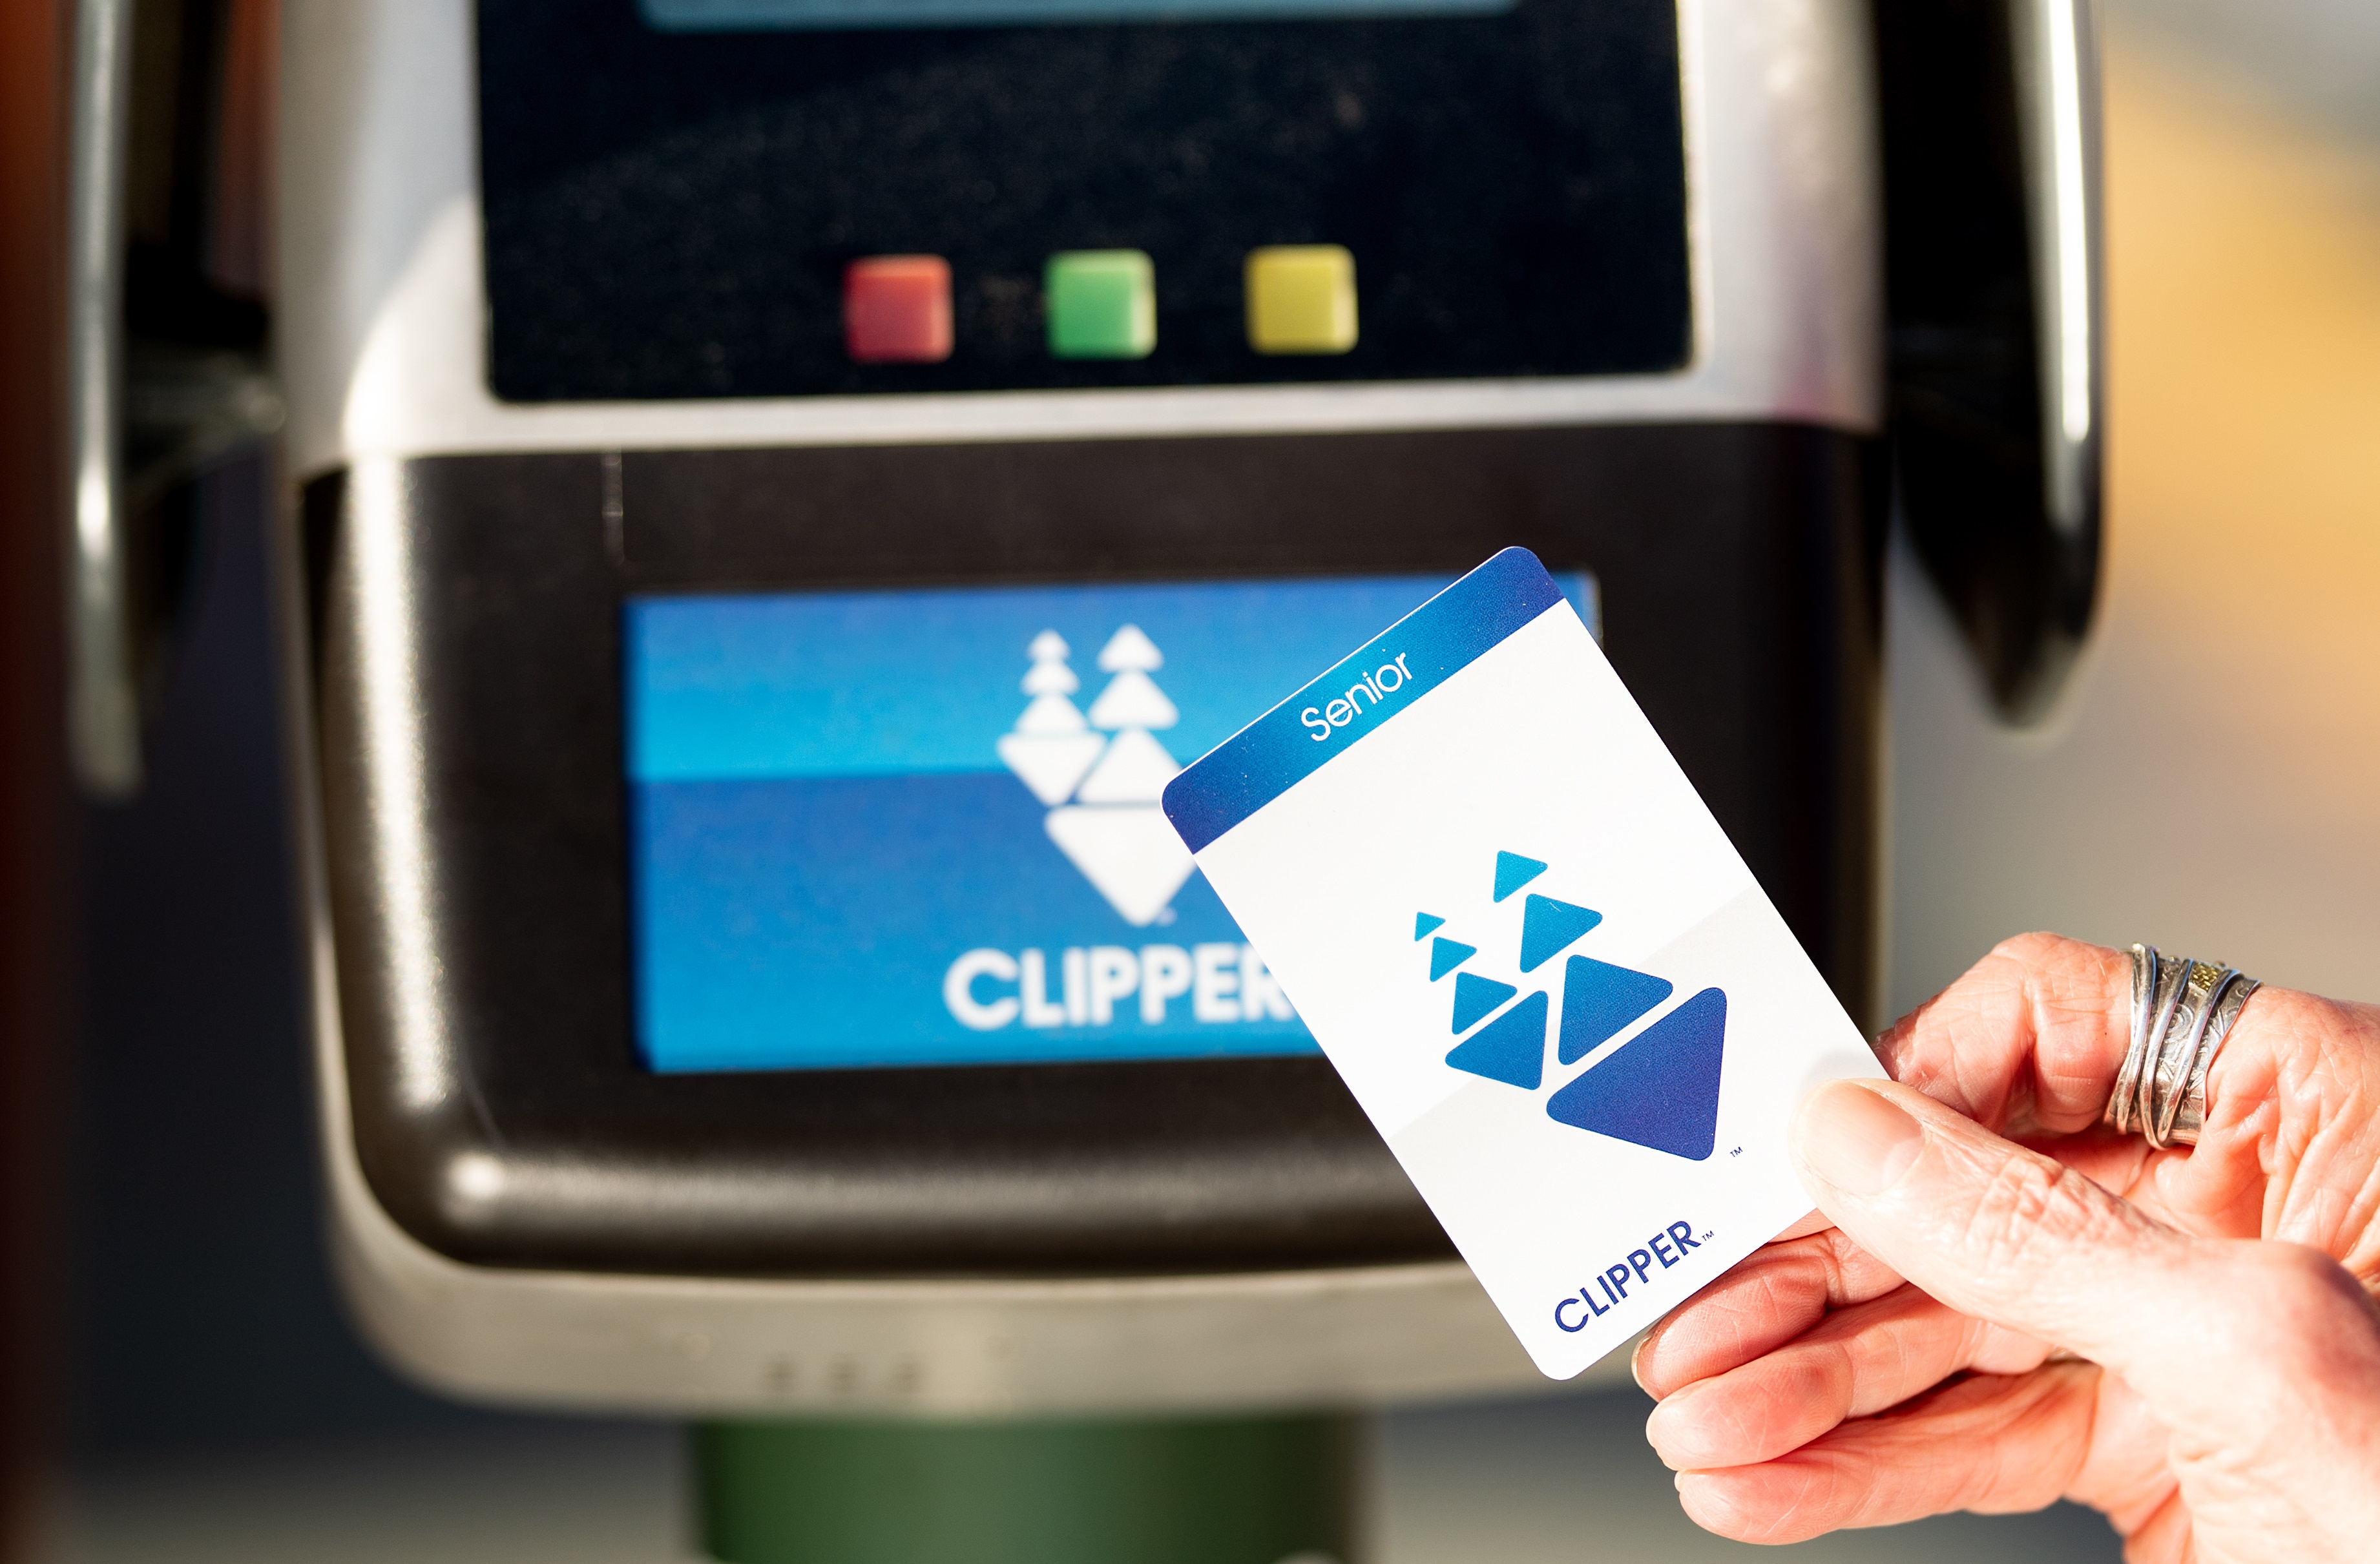 Close-up of a woman’s hand holding a Senior Clipper card over a card reader on a transit platform